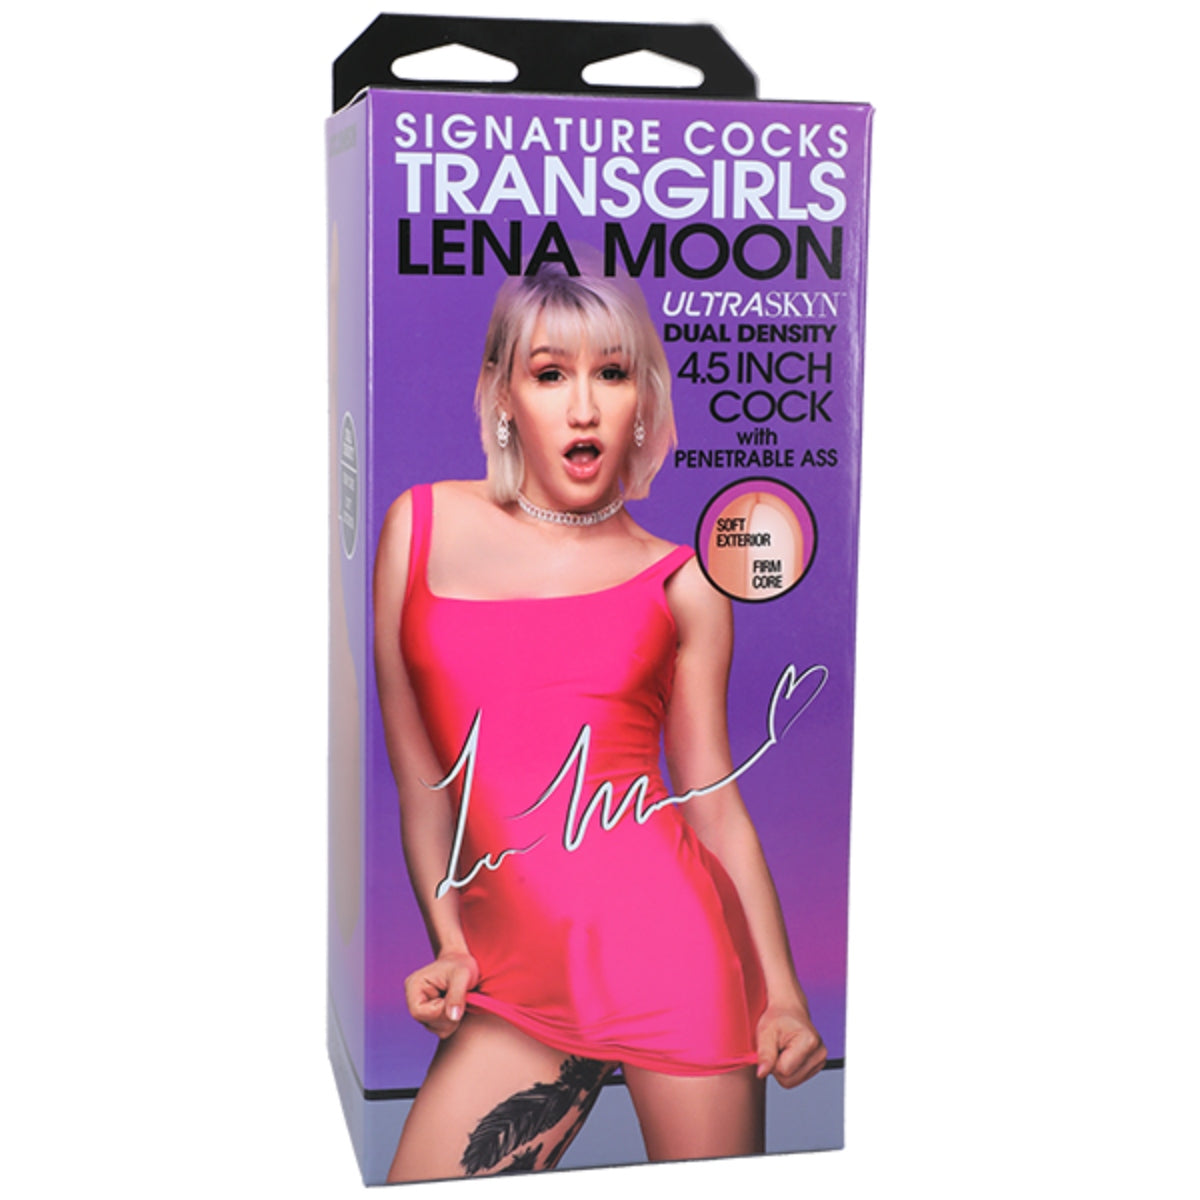 Signature Cocks Transgirls Lena Moon Ultraskyn Cock With Penetrable Ass Pink 4.5 Inch